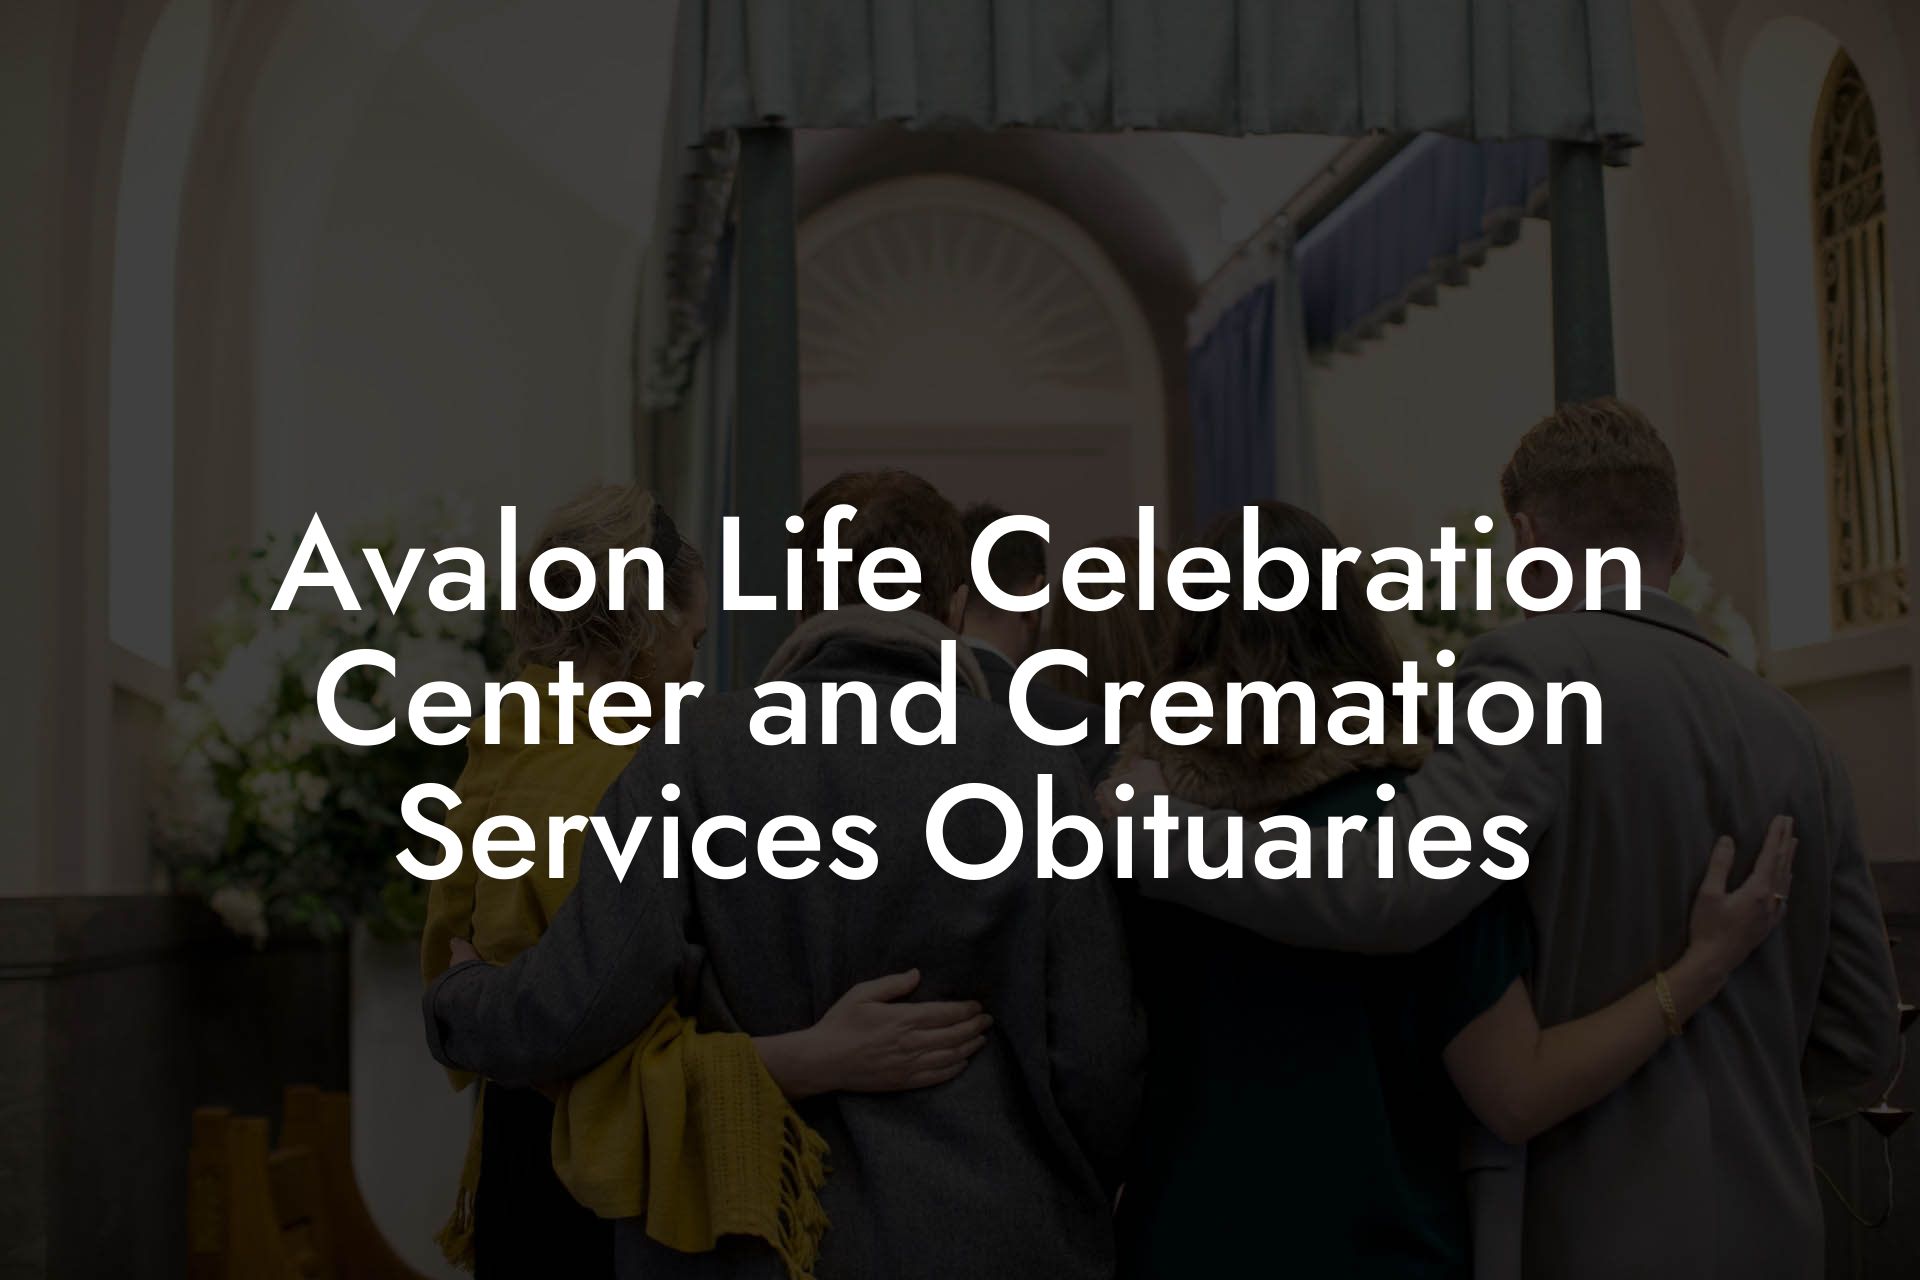 Avalon Life Celebration Center and Cremation Services Obituaries